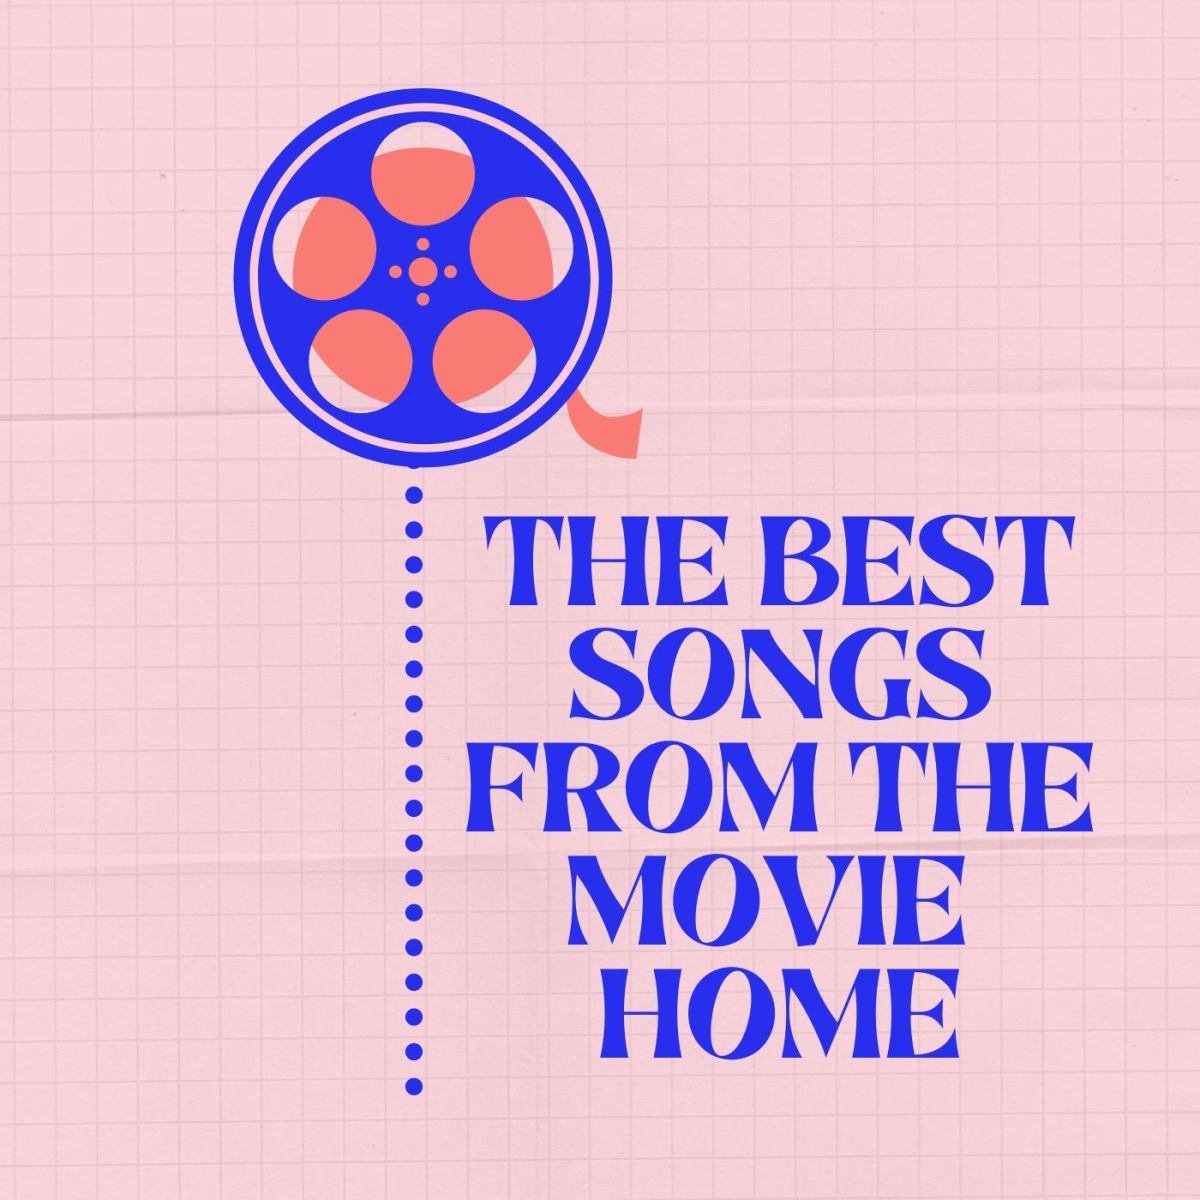 The 7 Best Songs From the Movie Home